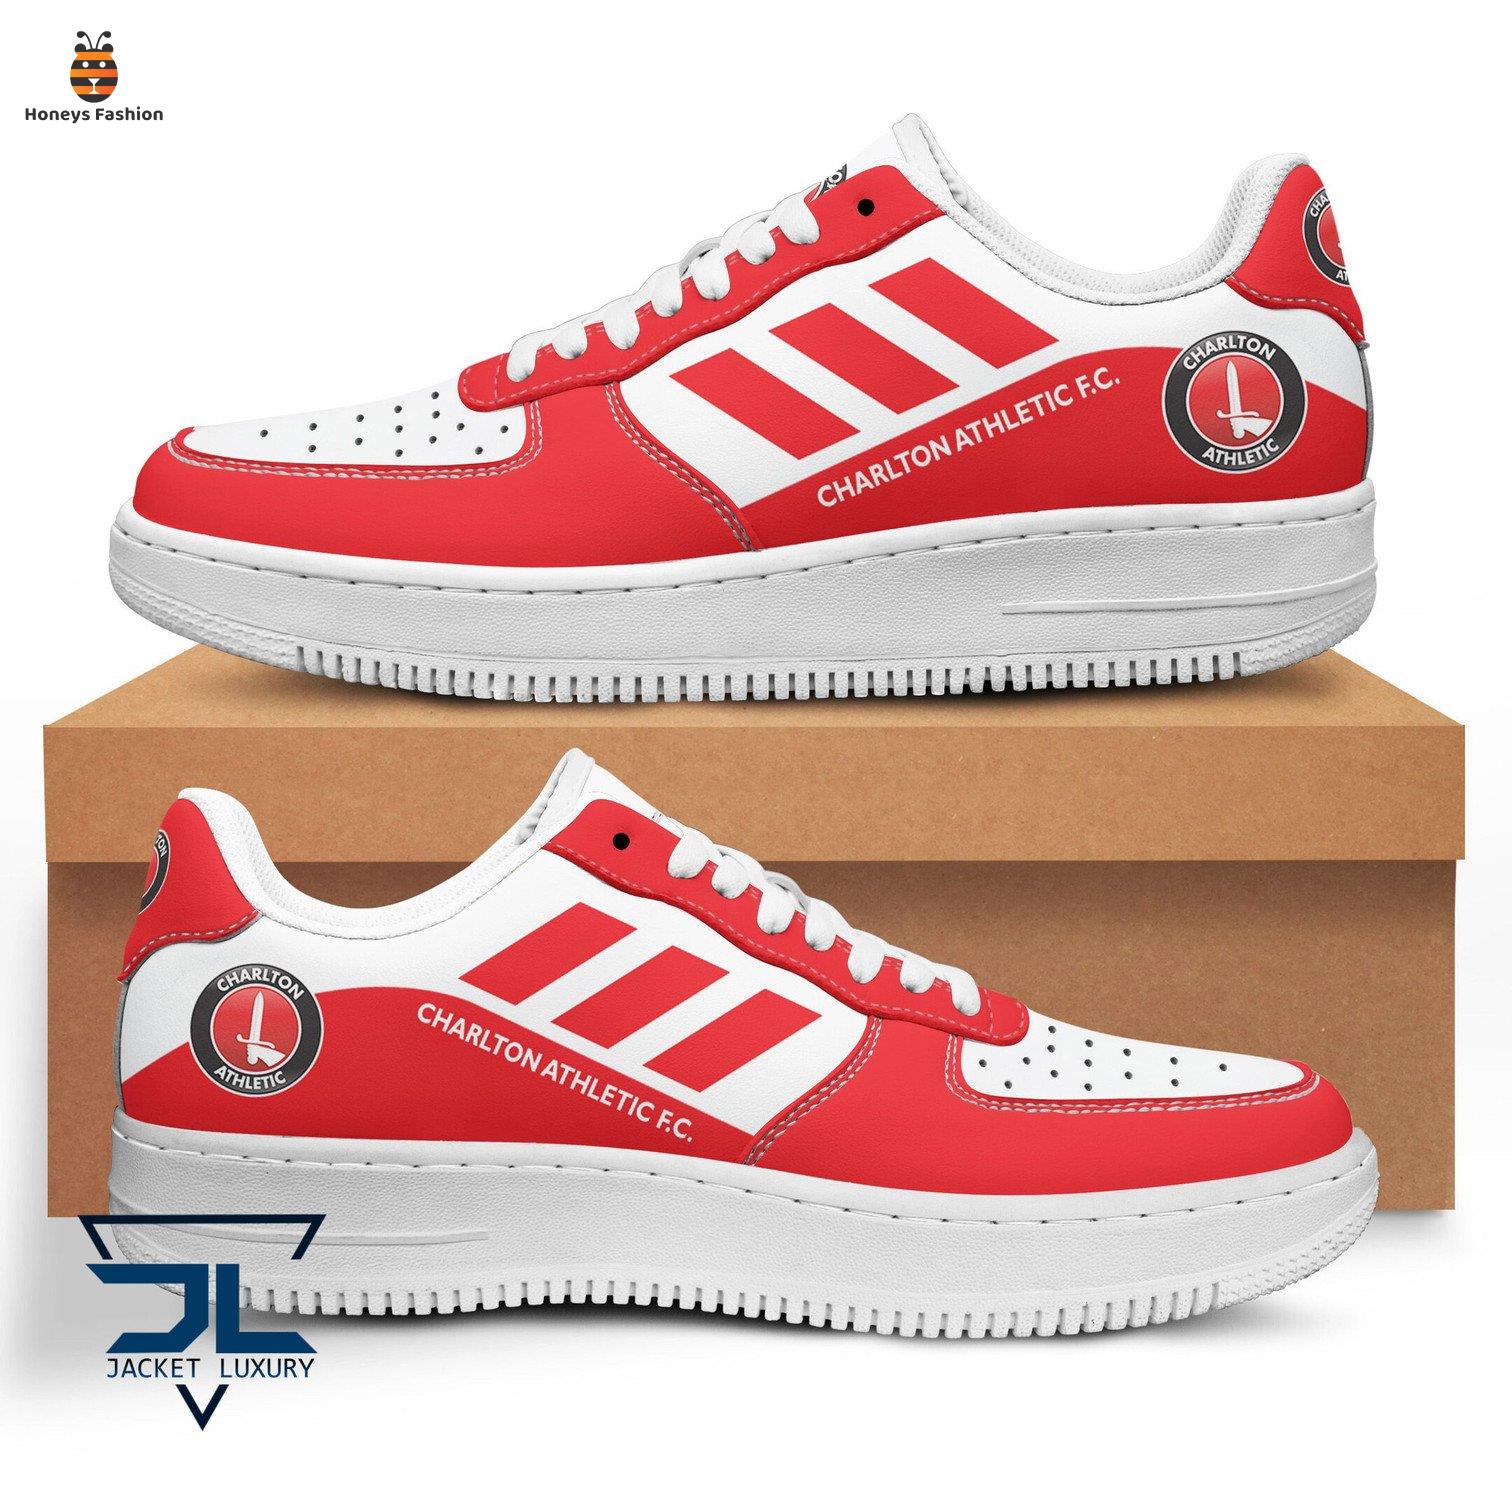 Charlton Athletic F.C air force 1 shoes